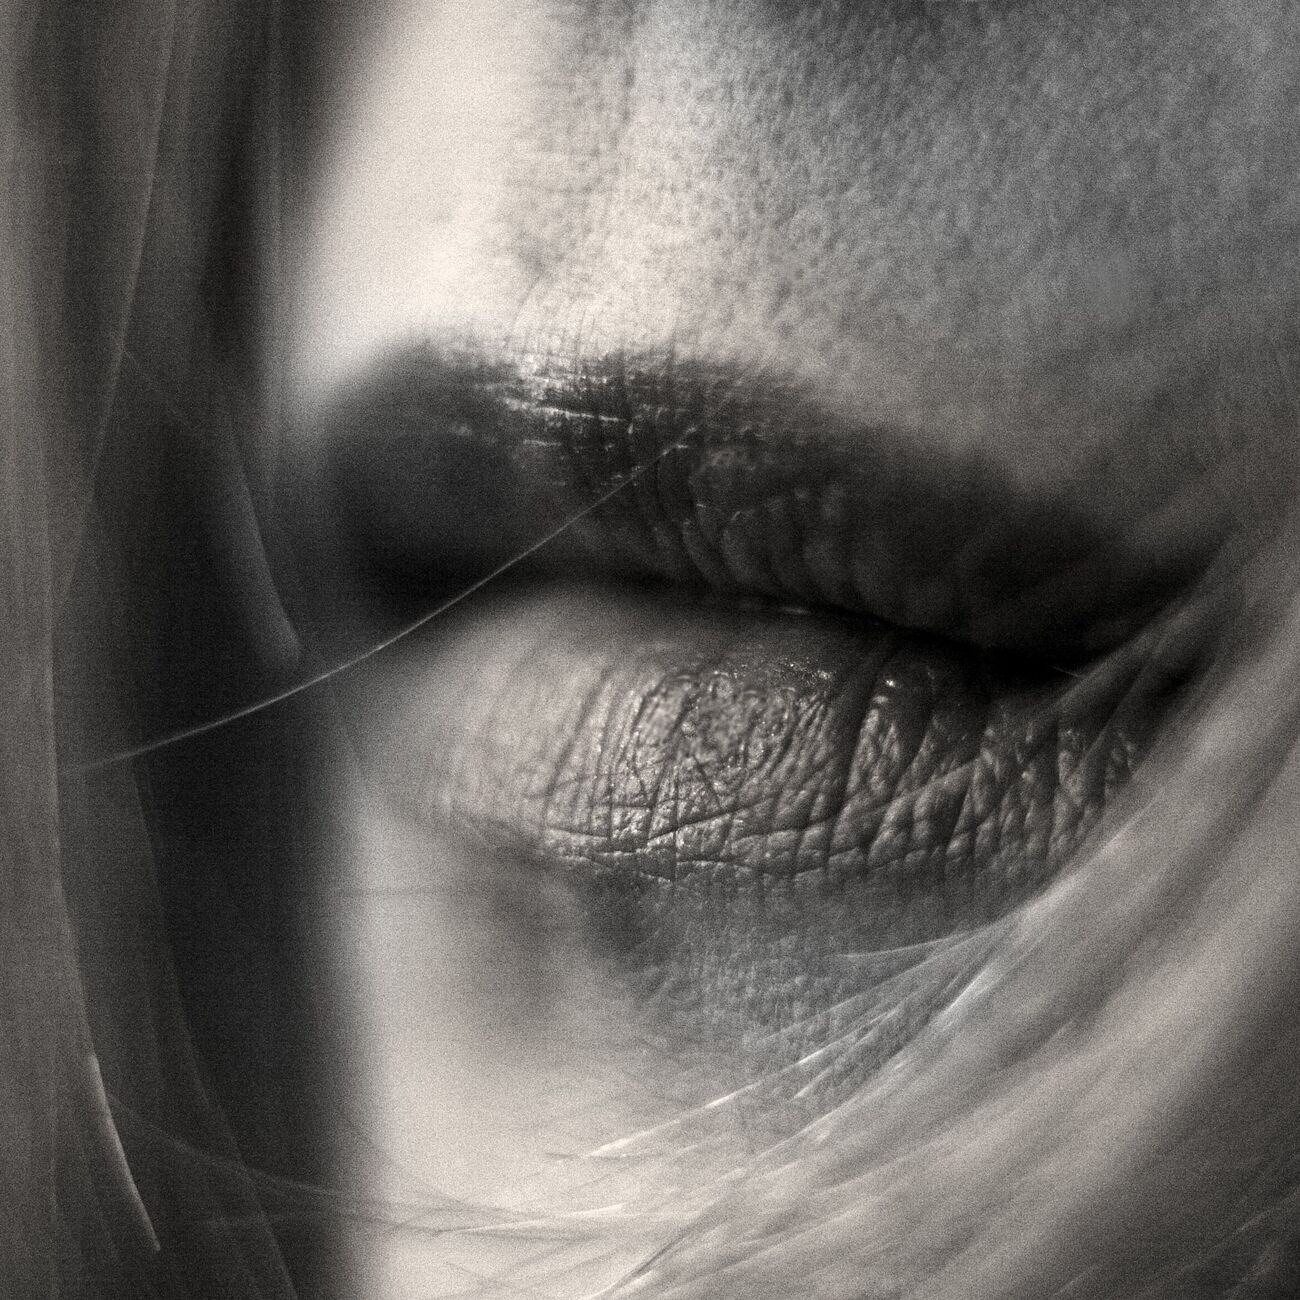 Photography 15.7 x 15.7 in, Sweet on her lips. Ref-580-12 - Denis Olivier Art Photography